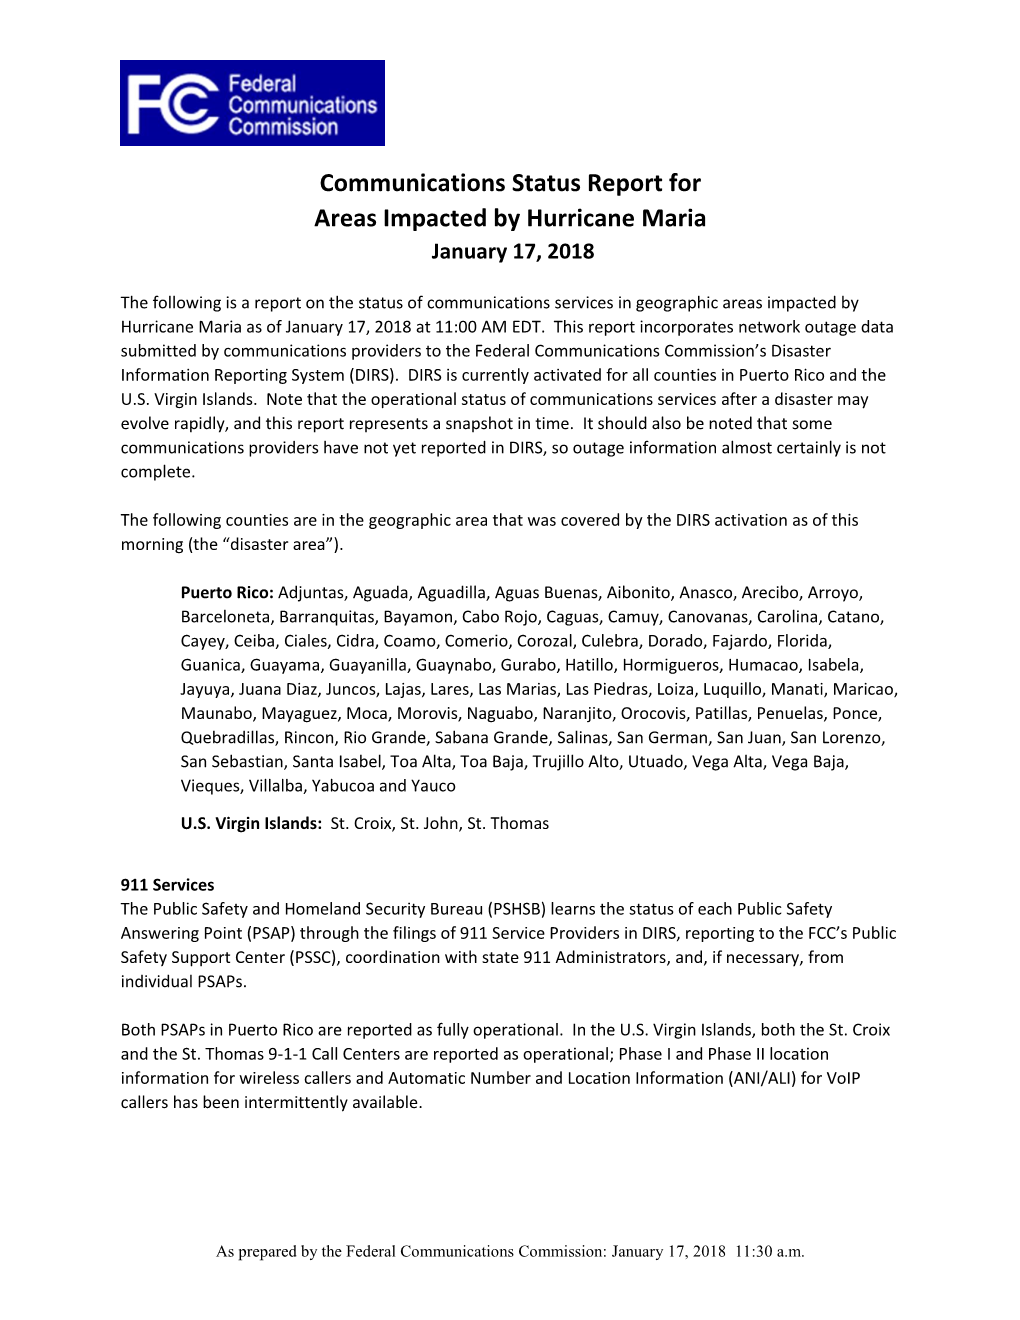 Communications Status Report for Areas Impacted by Hurricane Maria January 17, 2018